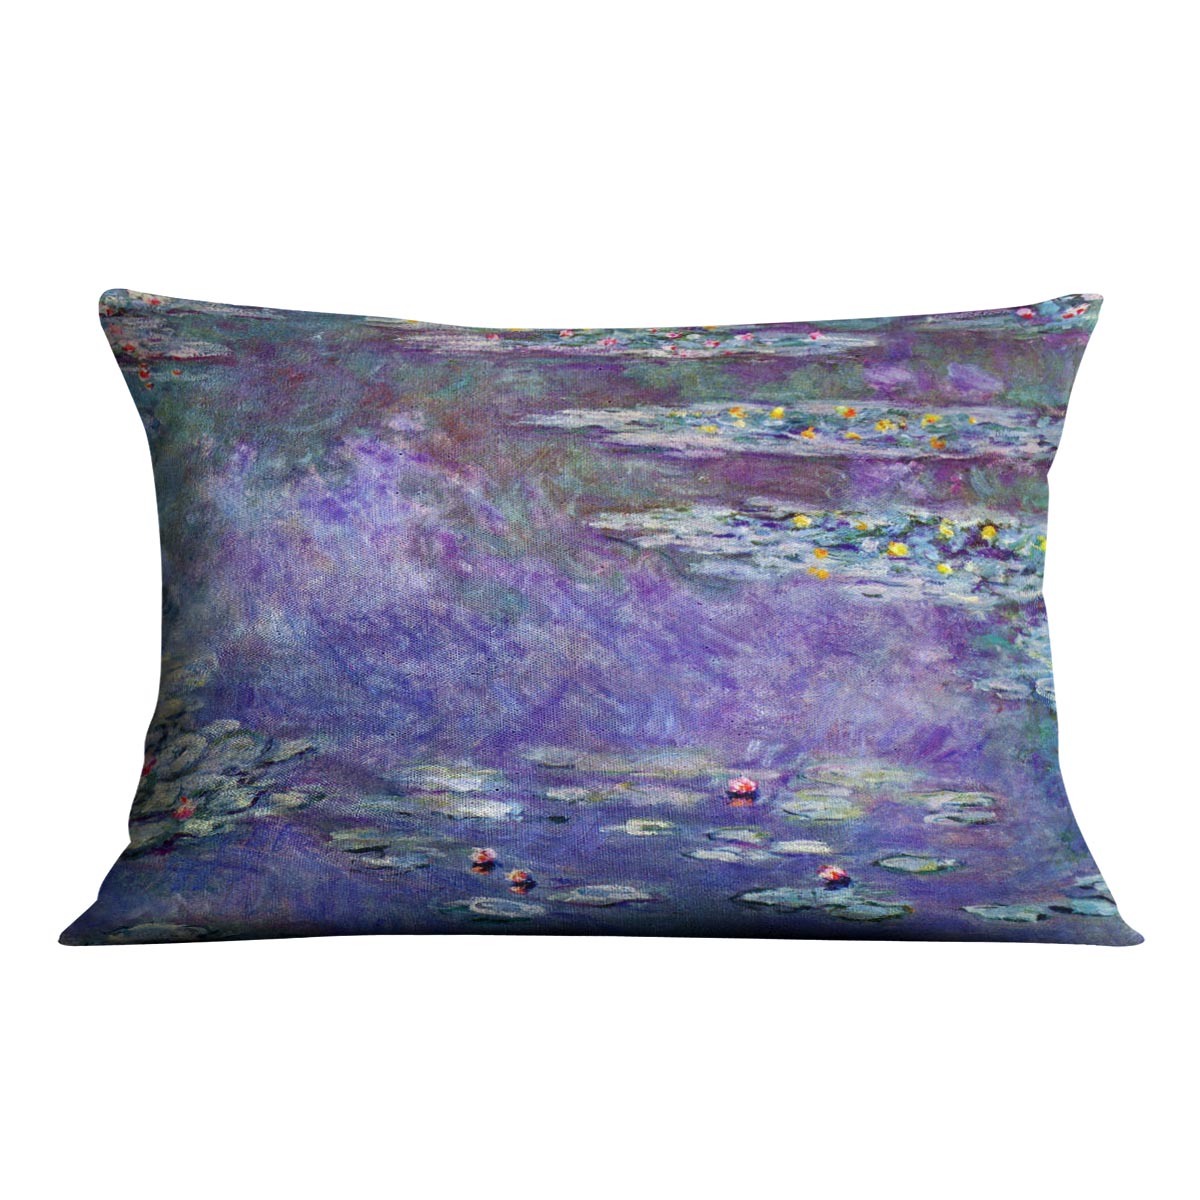 Water Lily Pond 3 by Monet Cushion